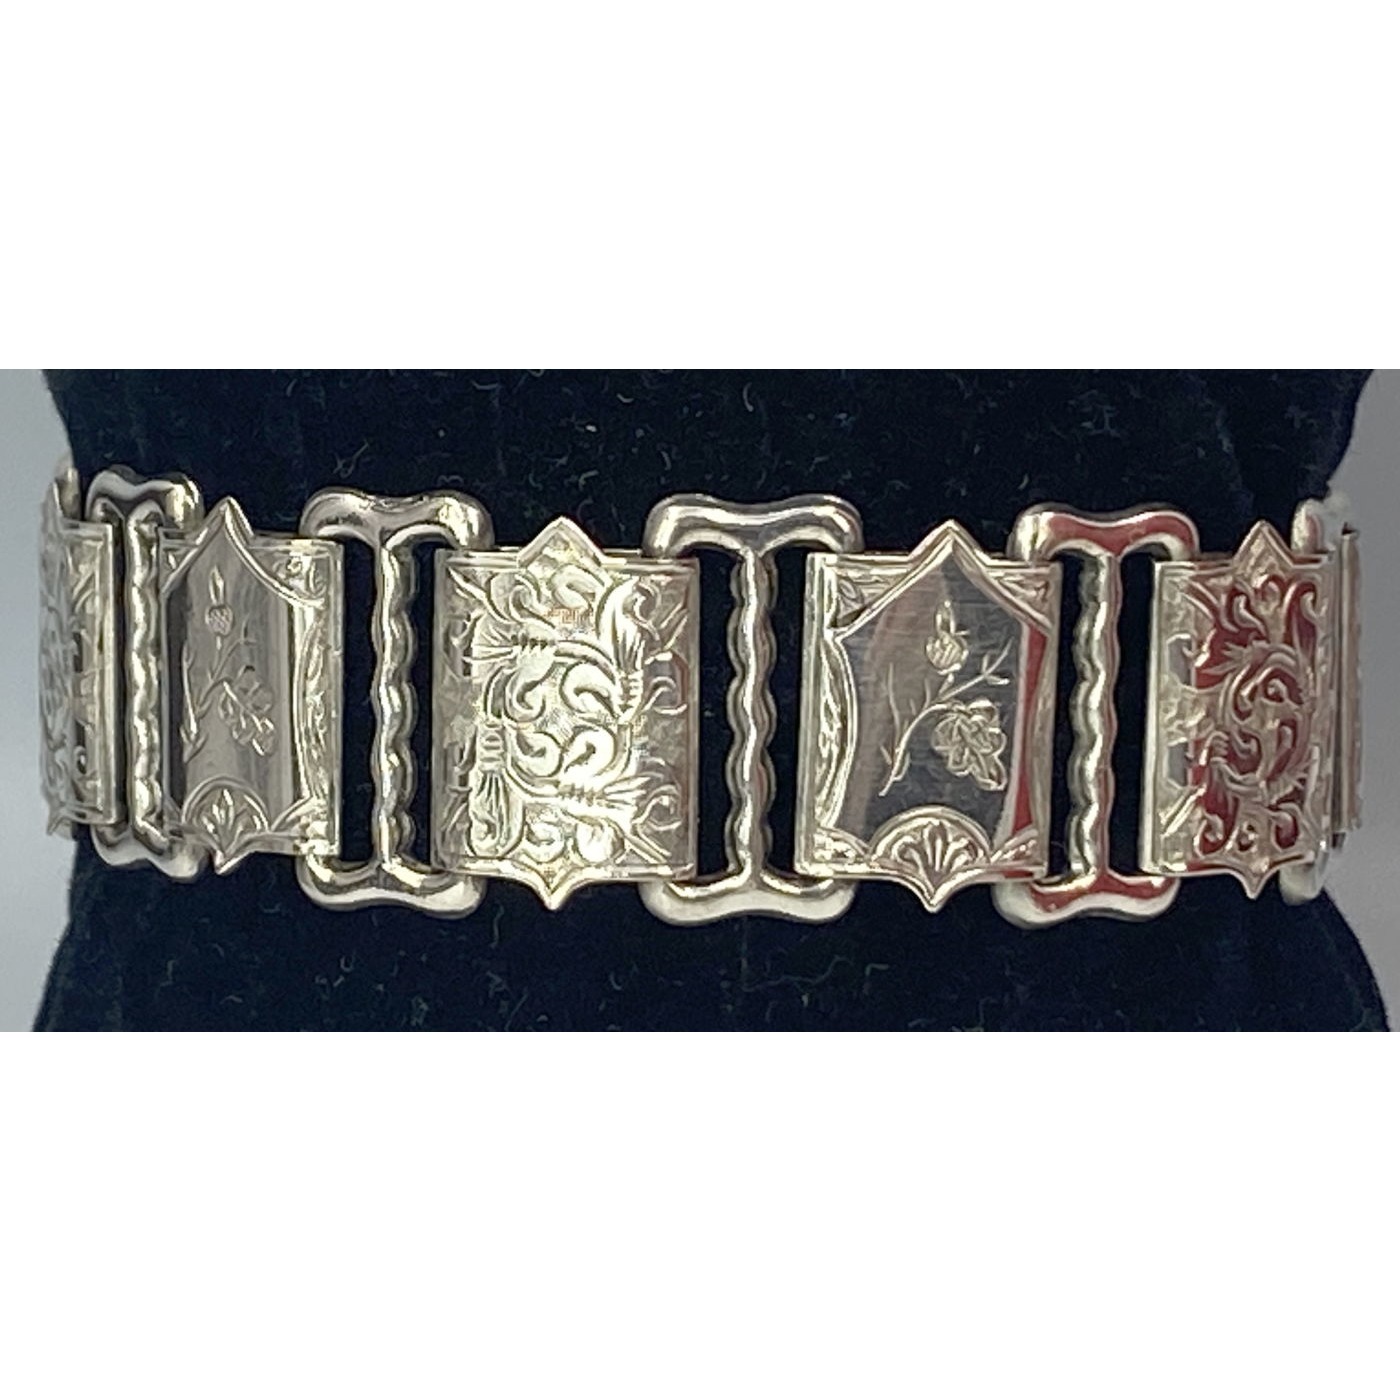 Fabulous Floral and Swirls Embossed Link Antique English Bracelet